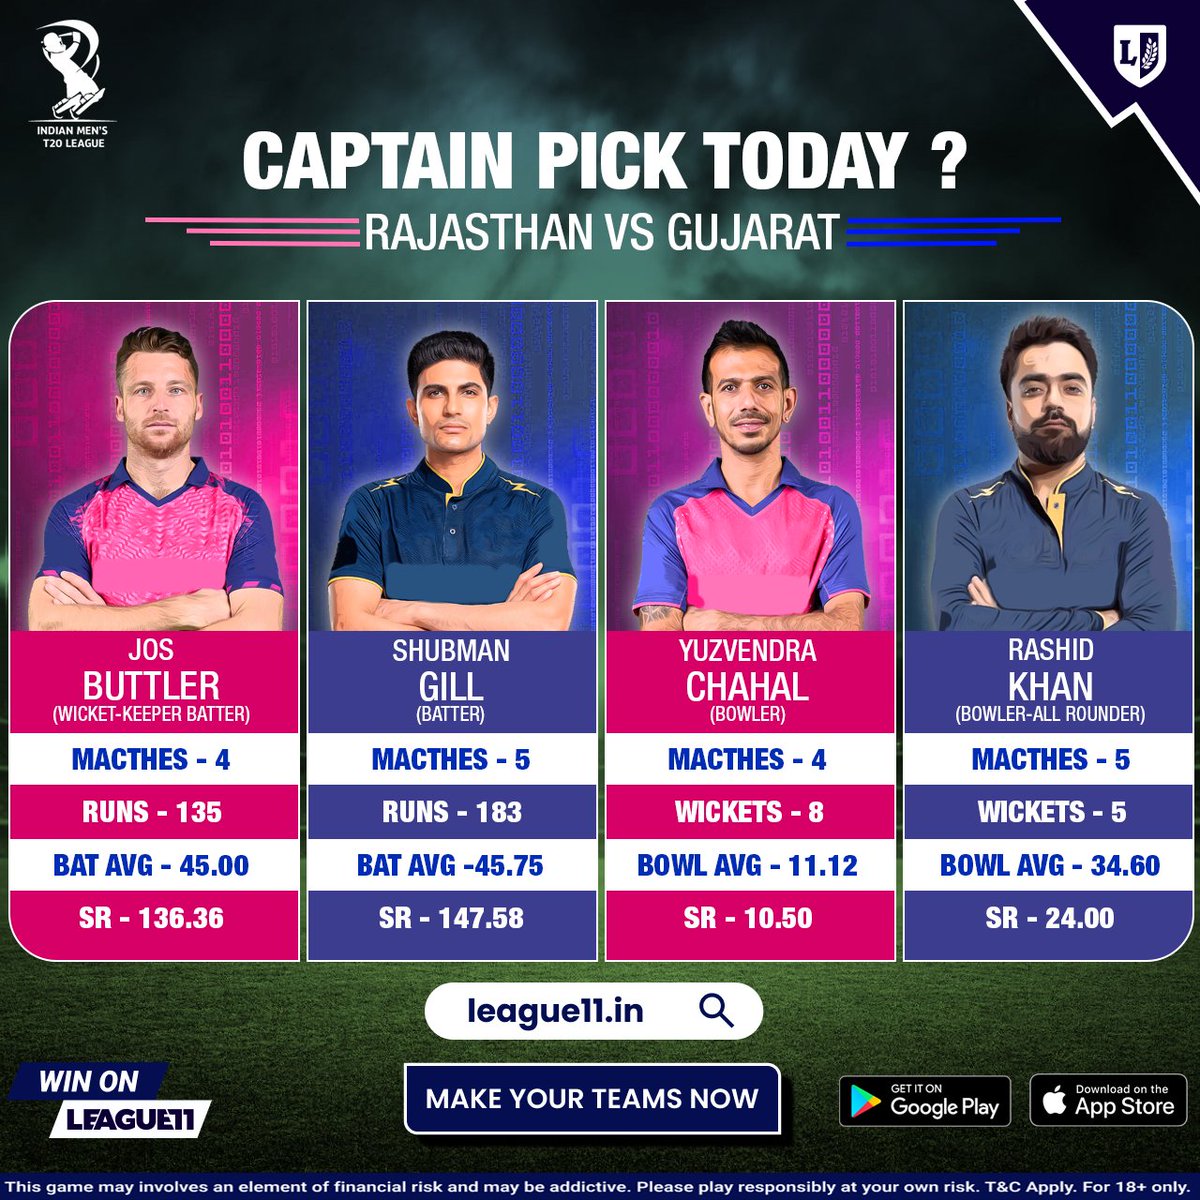 Much awaited picks for the big games are here! 😱

After loosing last game, GT would be looking to stop the winning streak of RR.

Who will be your captains pick for tonight?

#fantasycricket #fantasycricketguru #cricketprediction #league11prediction #dream11prediction #ipl…